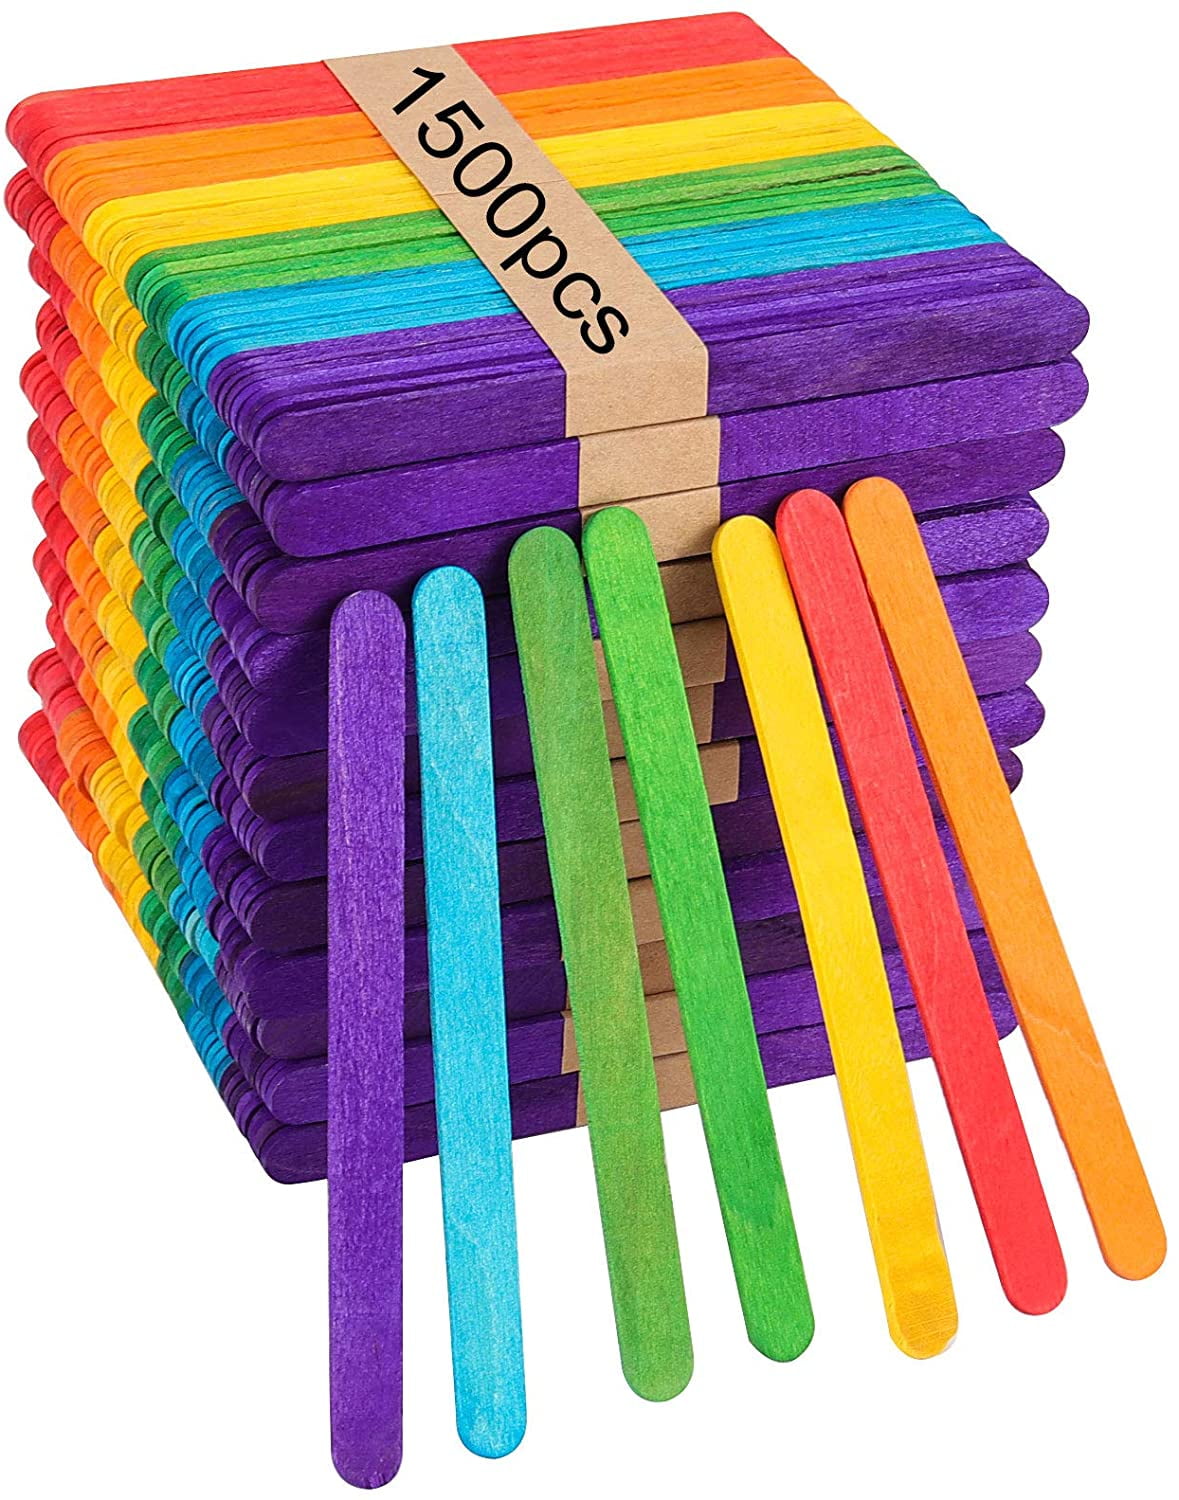 Wooden Craft Sticks, Colored Popsicle Sticks for Crafts, Rainbow 4.5 Inches Jumbo Bulk Pack of 1000, by Mandala Crafts